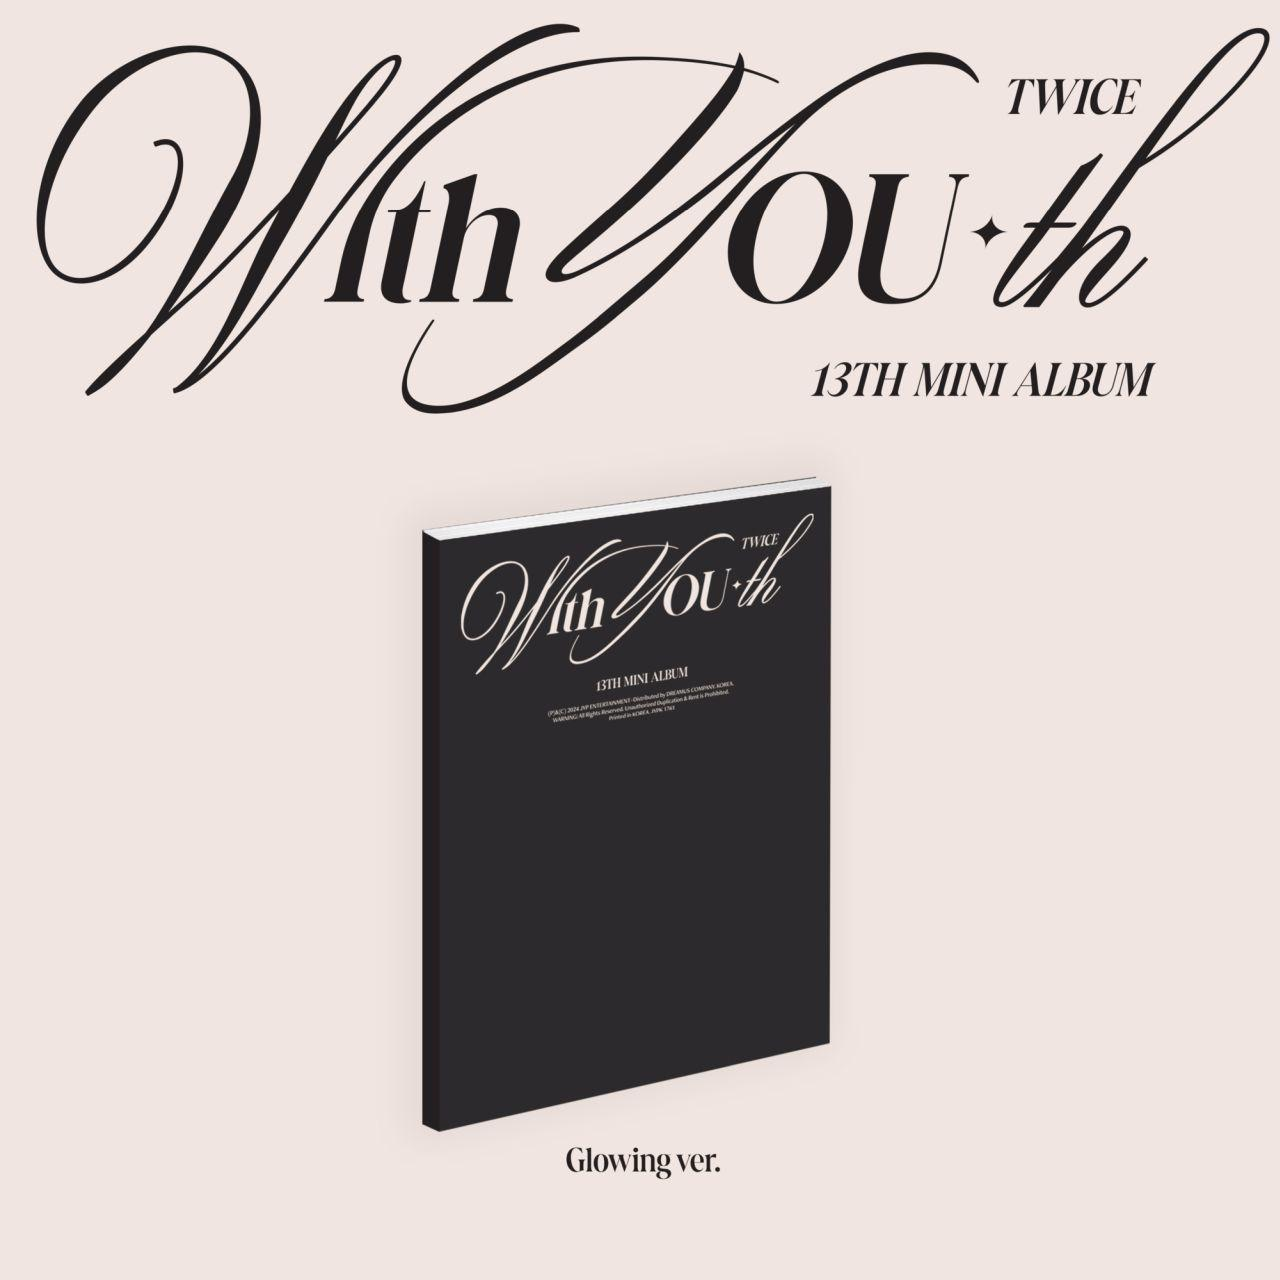 Twice - With You-TH (Glowing Ver.) - (CD)